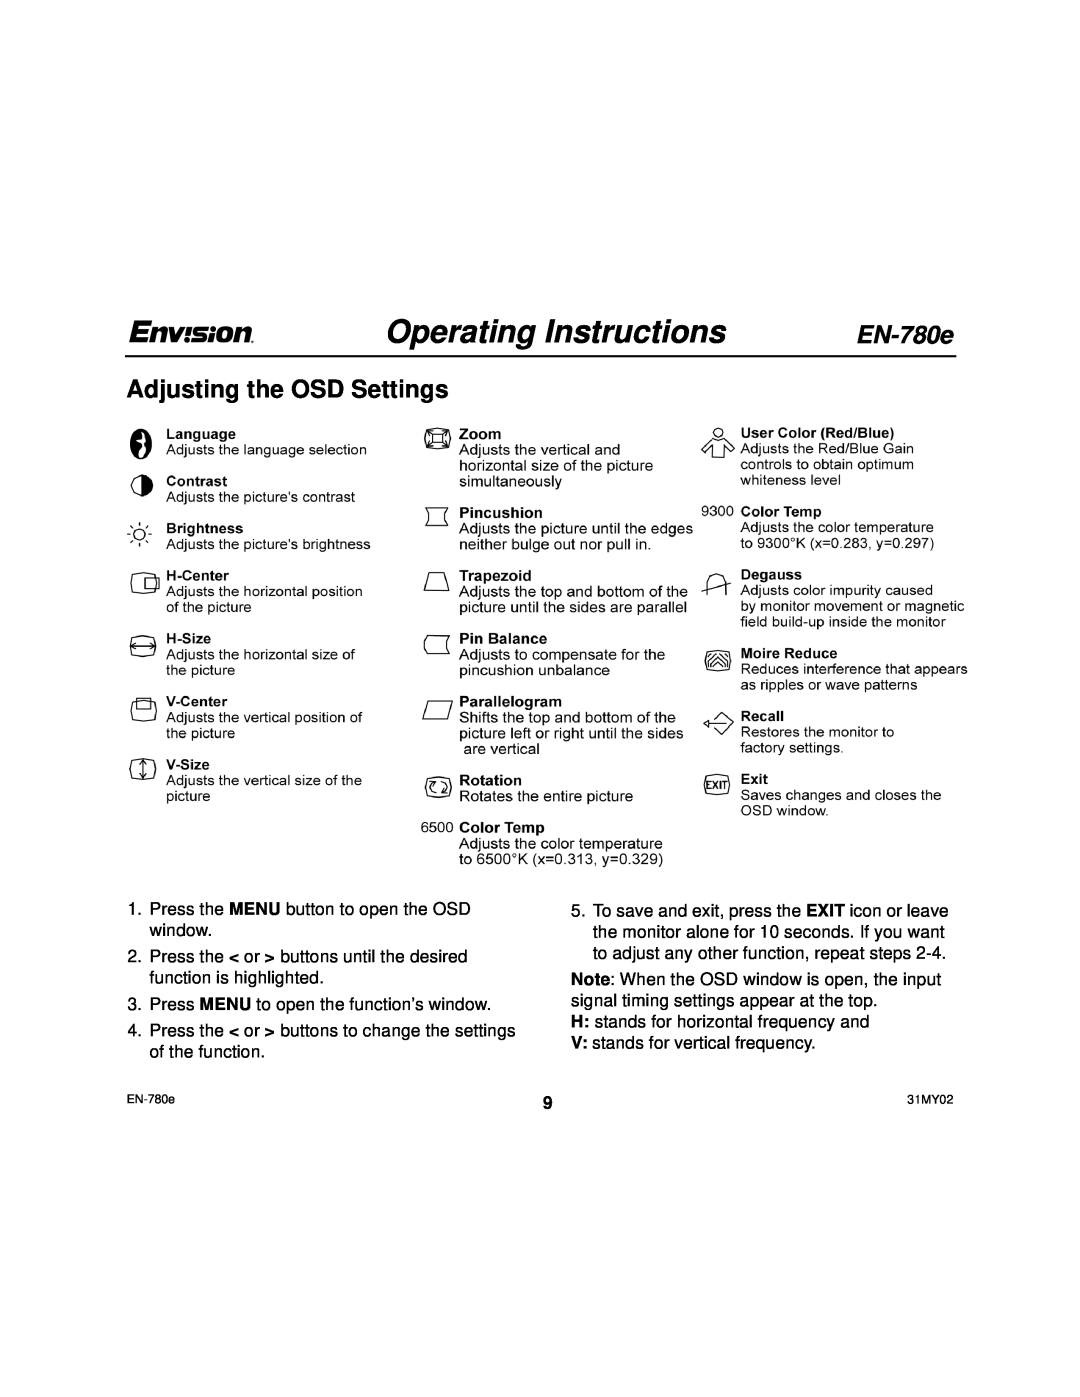 Envision Peripherals EN-780e user manual Adjusting the OSD Settings, Operating Instructions 